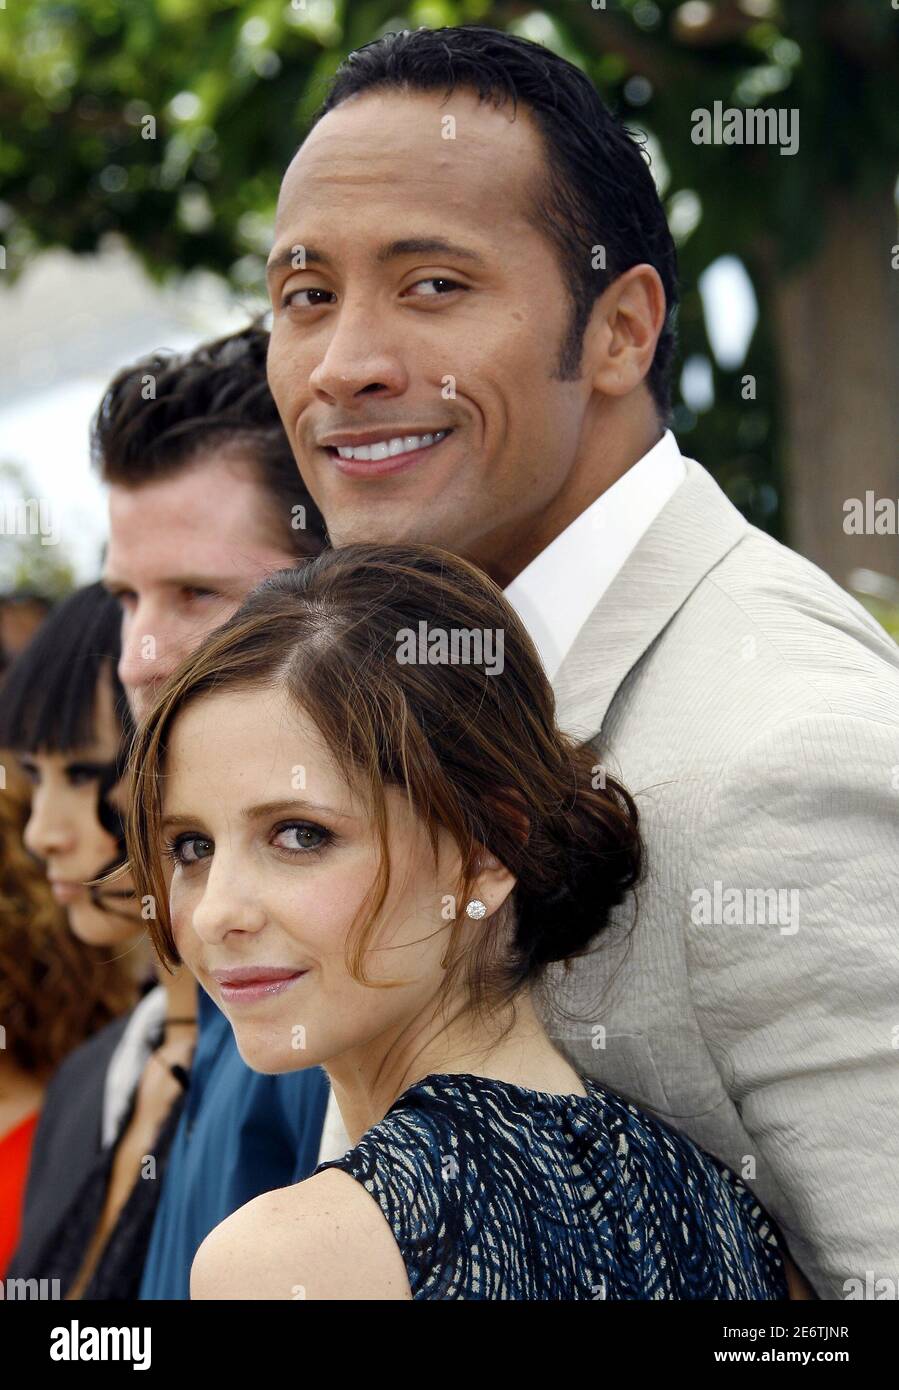 Cast members Dwayne 'The Rock' Johnson (R) and U.S. actress Sarah Michelle Gellar attend a photocall for [U.S. director Richard Kelly's] in-competition film 'Southland Tales' at the 59th Cannes Film Festival, May 21, 2006. Stock Photo